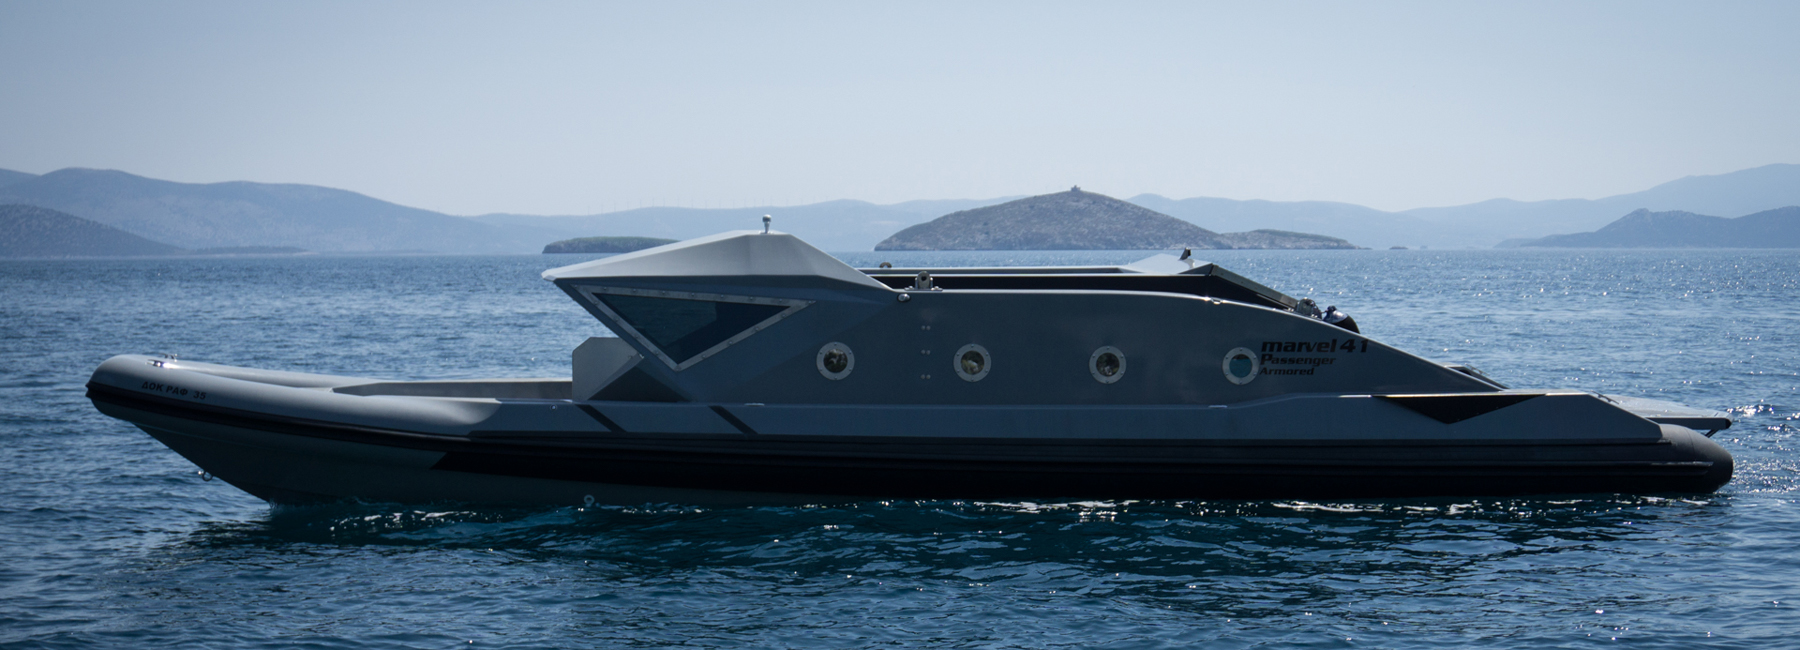 marvel 41 boat by marvel + nikos manafis is a one-off ...